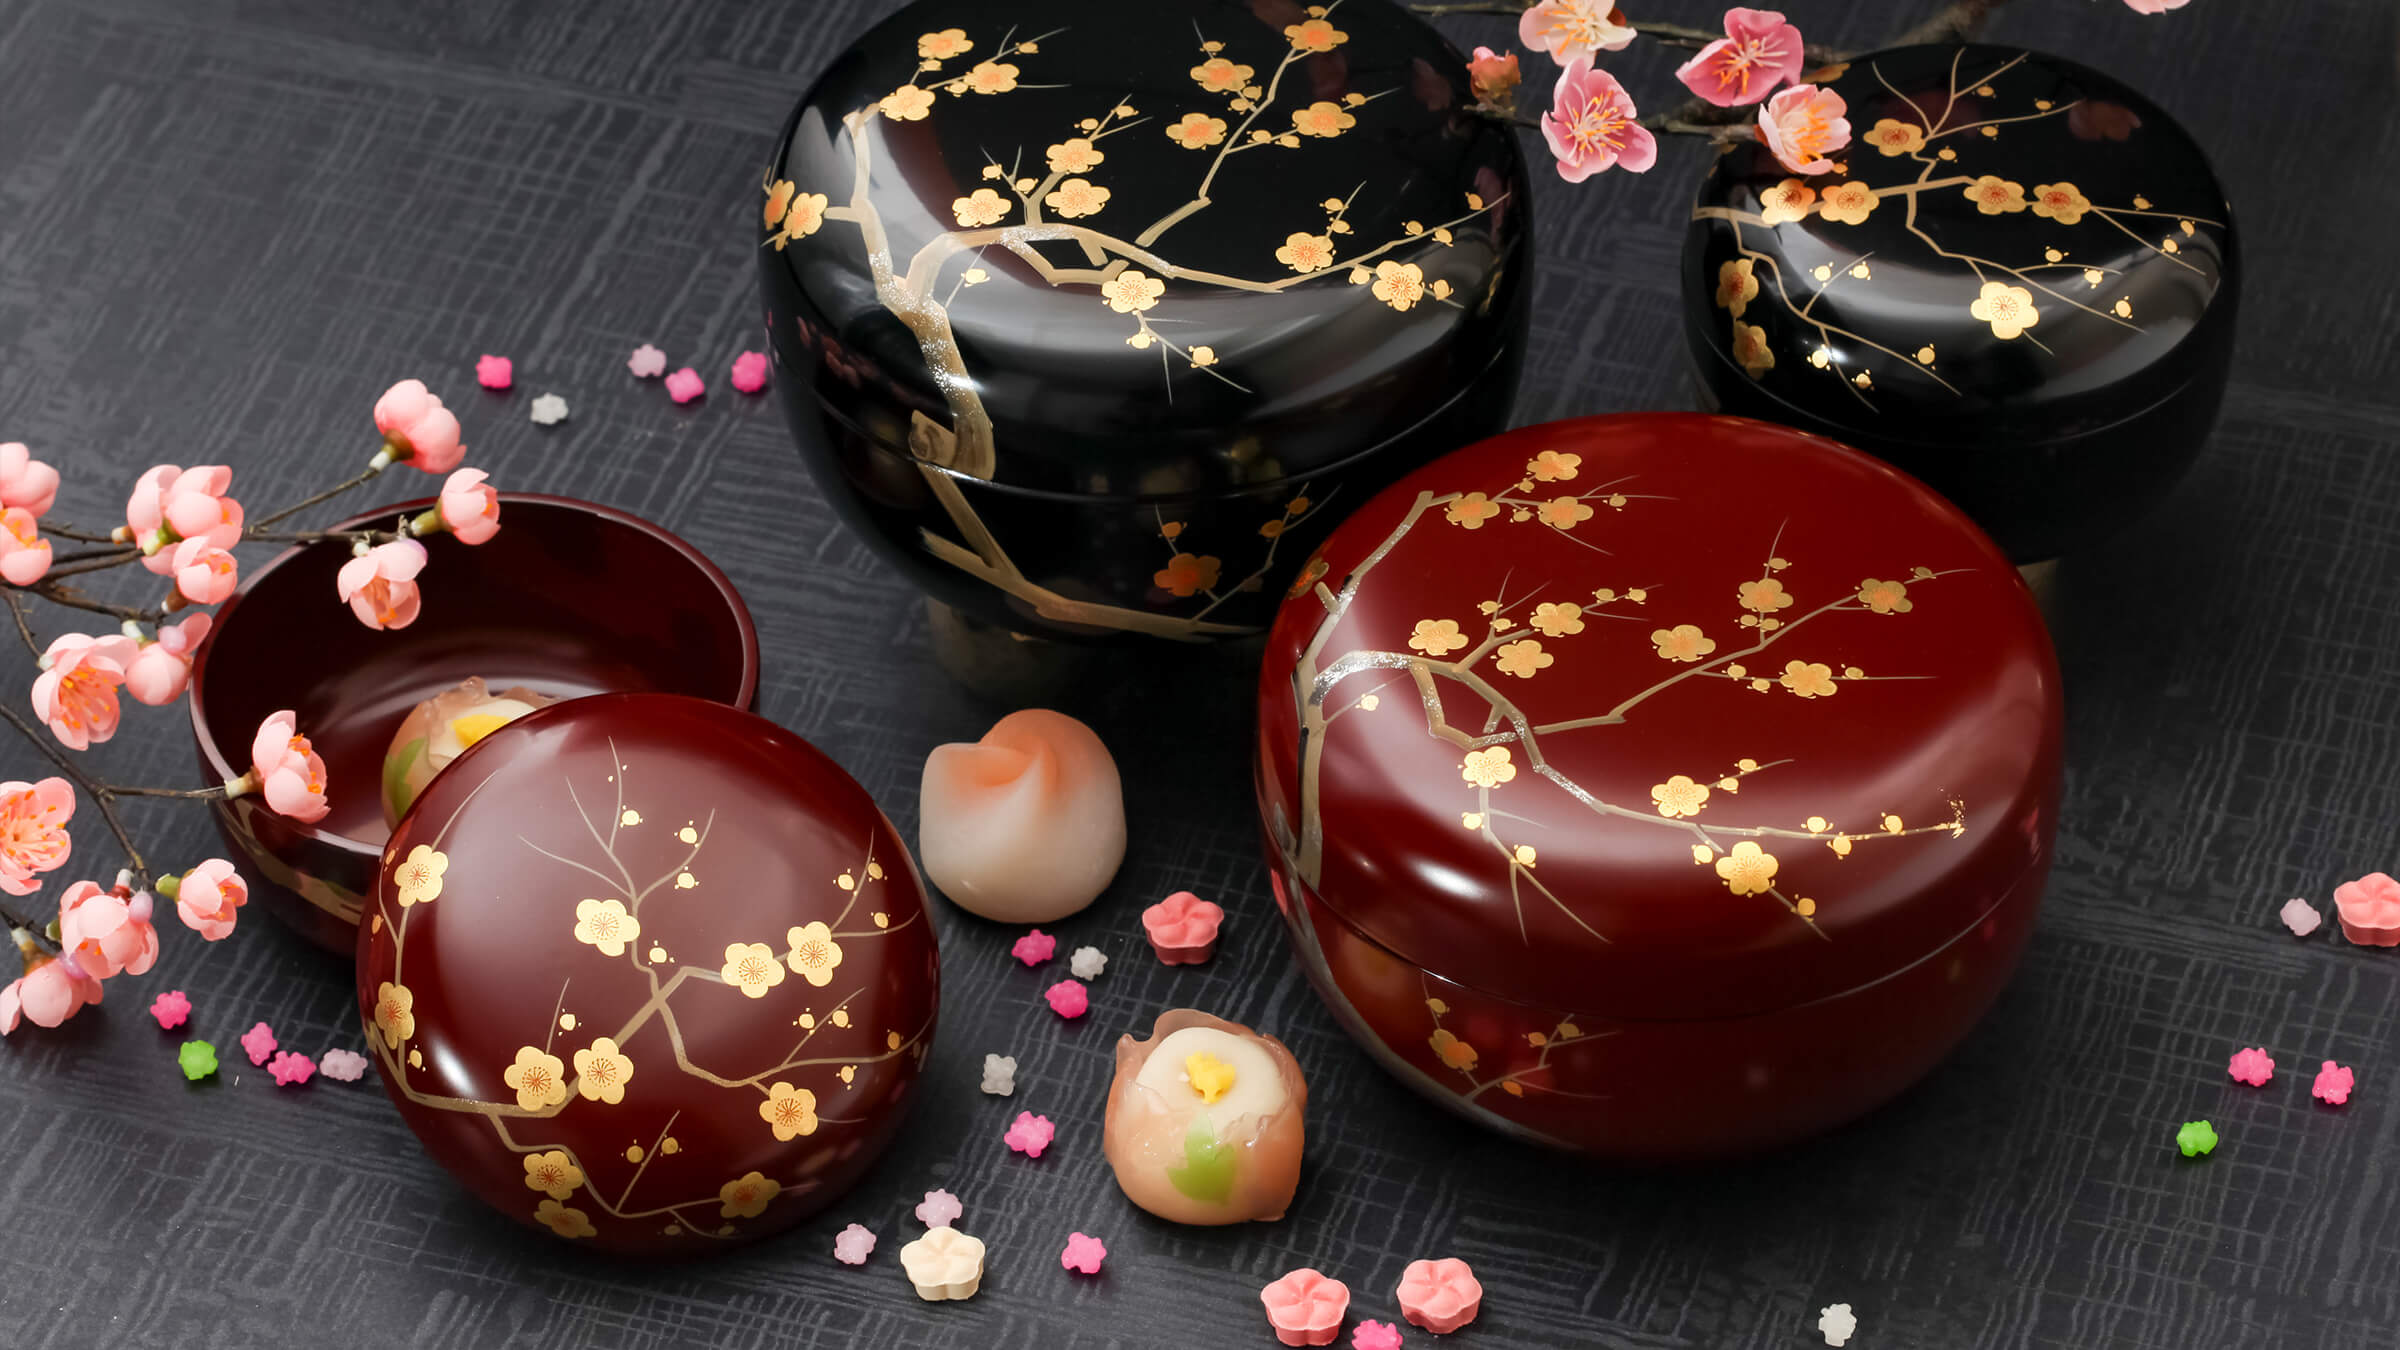 How to Care and Maintain Your Japanese Gifts: Preserving the